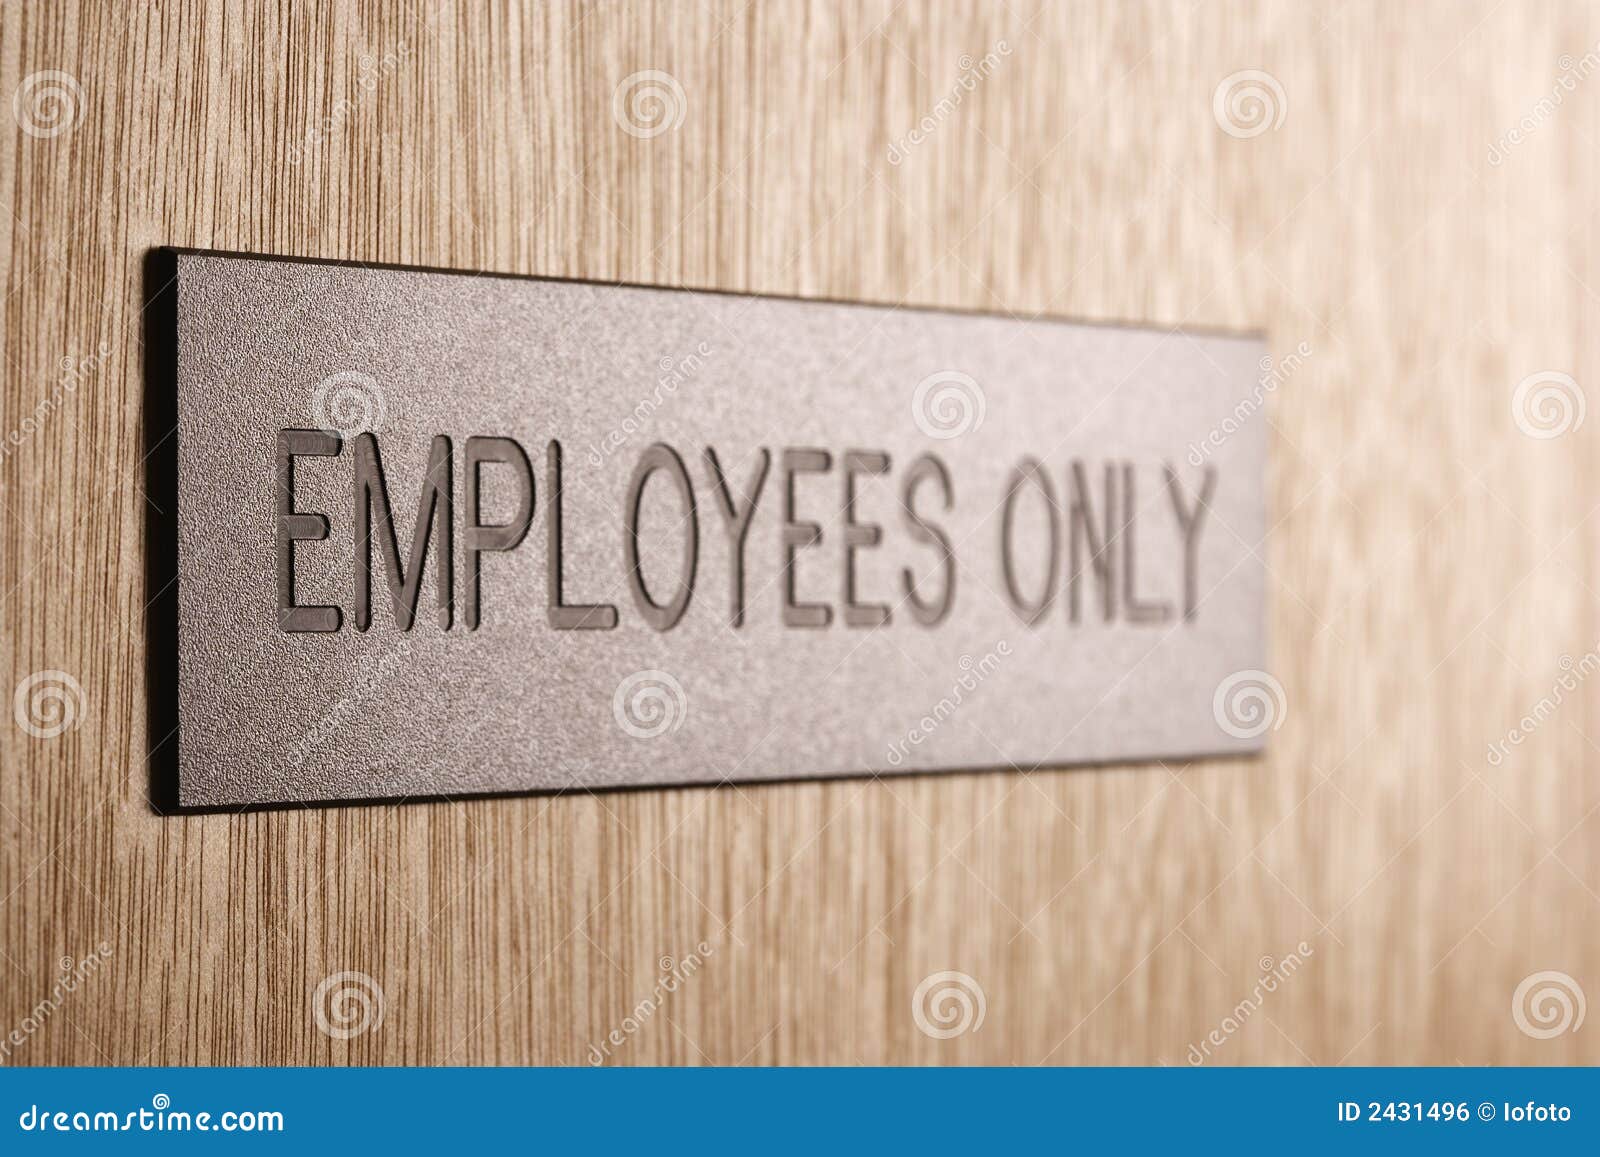 Employees Only Sign. Royalty Free Stock Image  Image: 2431496